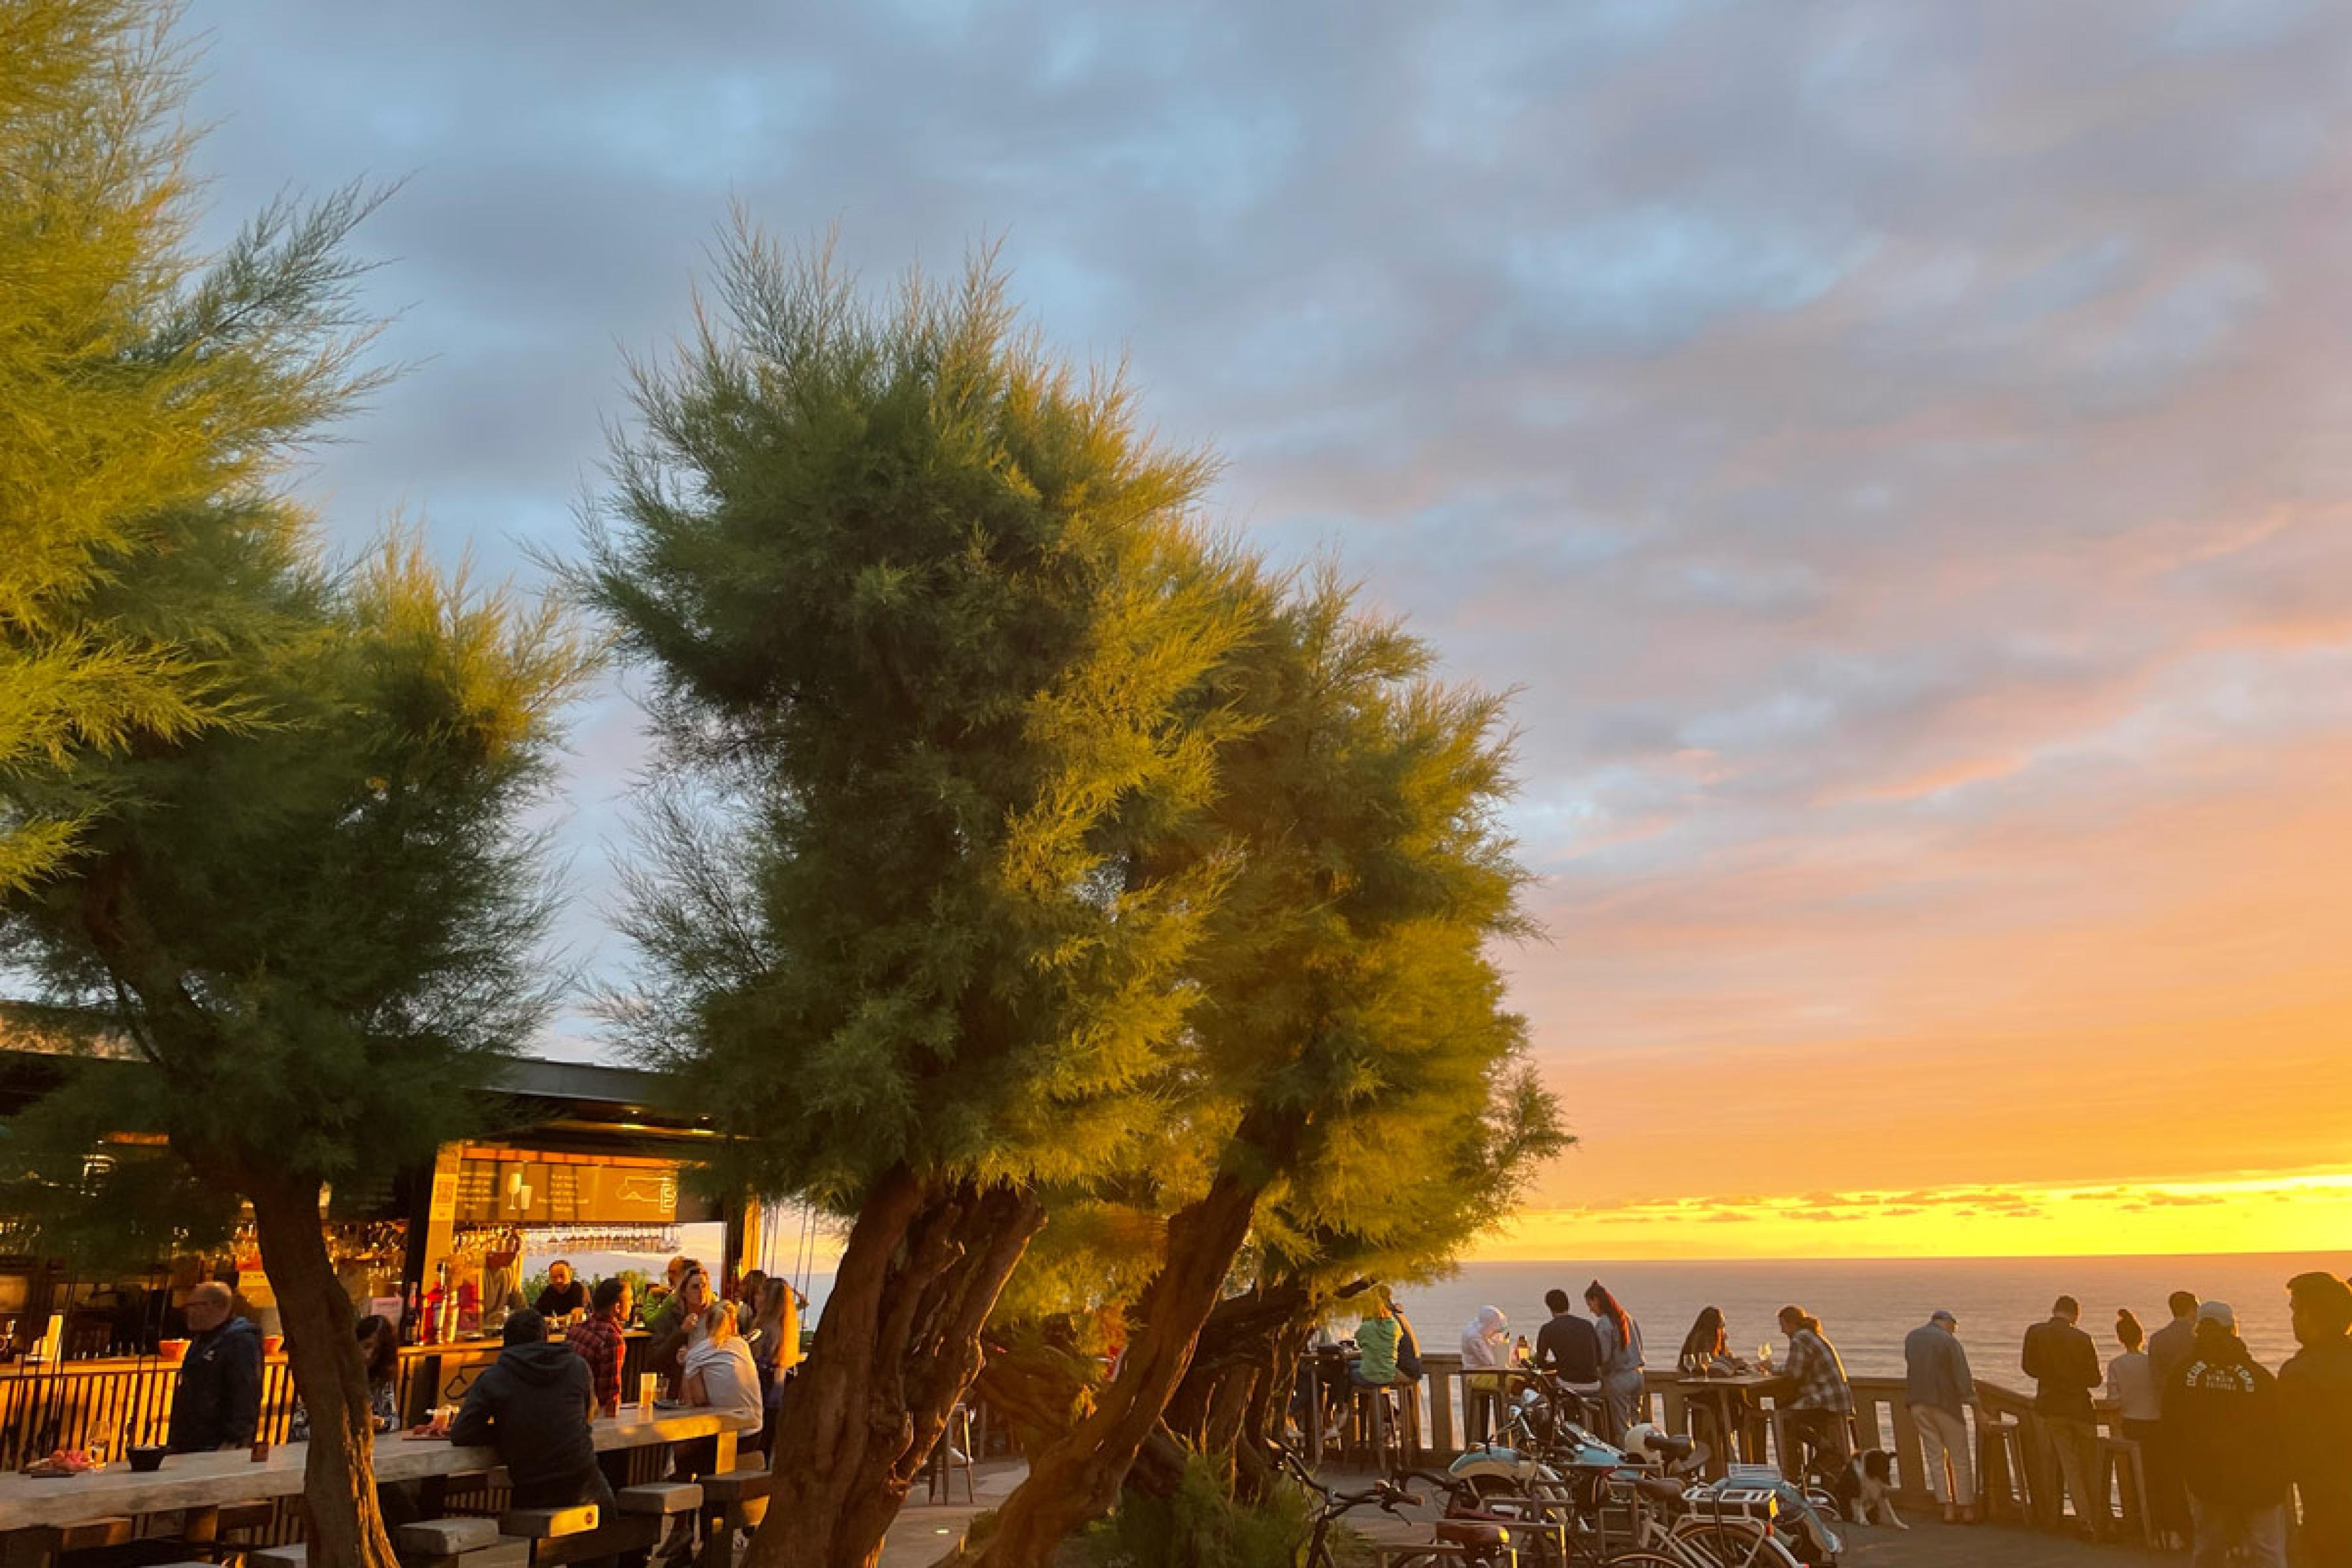 sunset view over ocean with outdoor restaurant in foreground